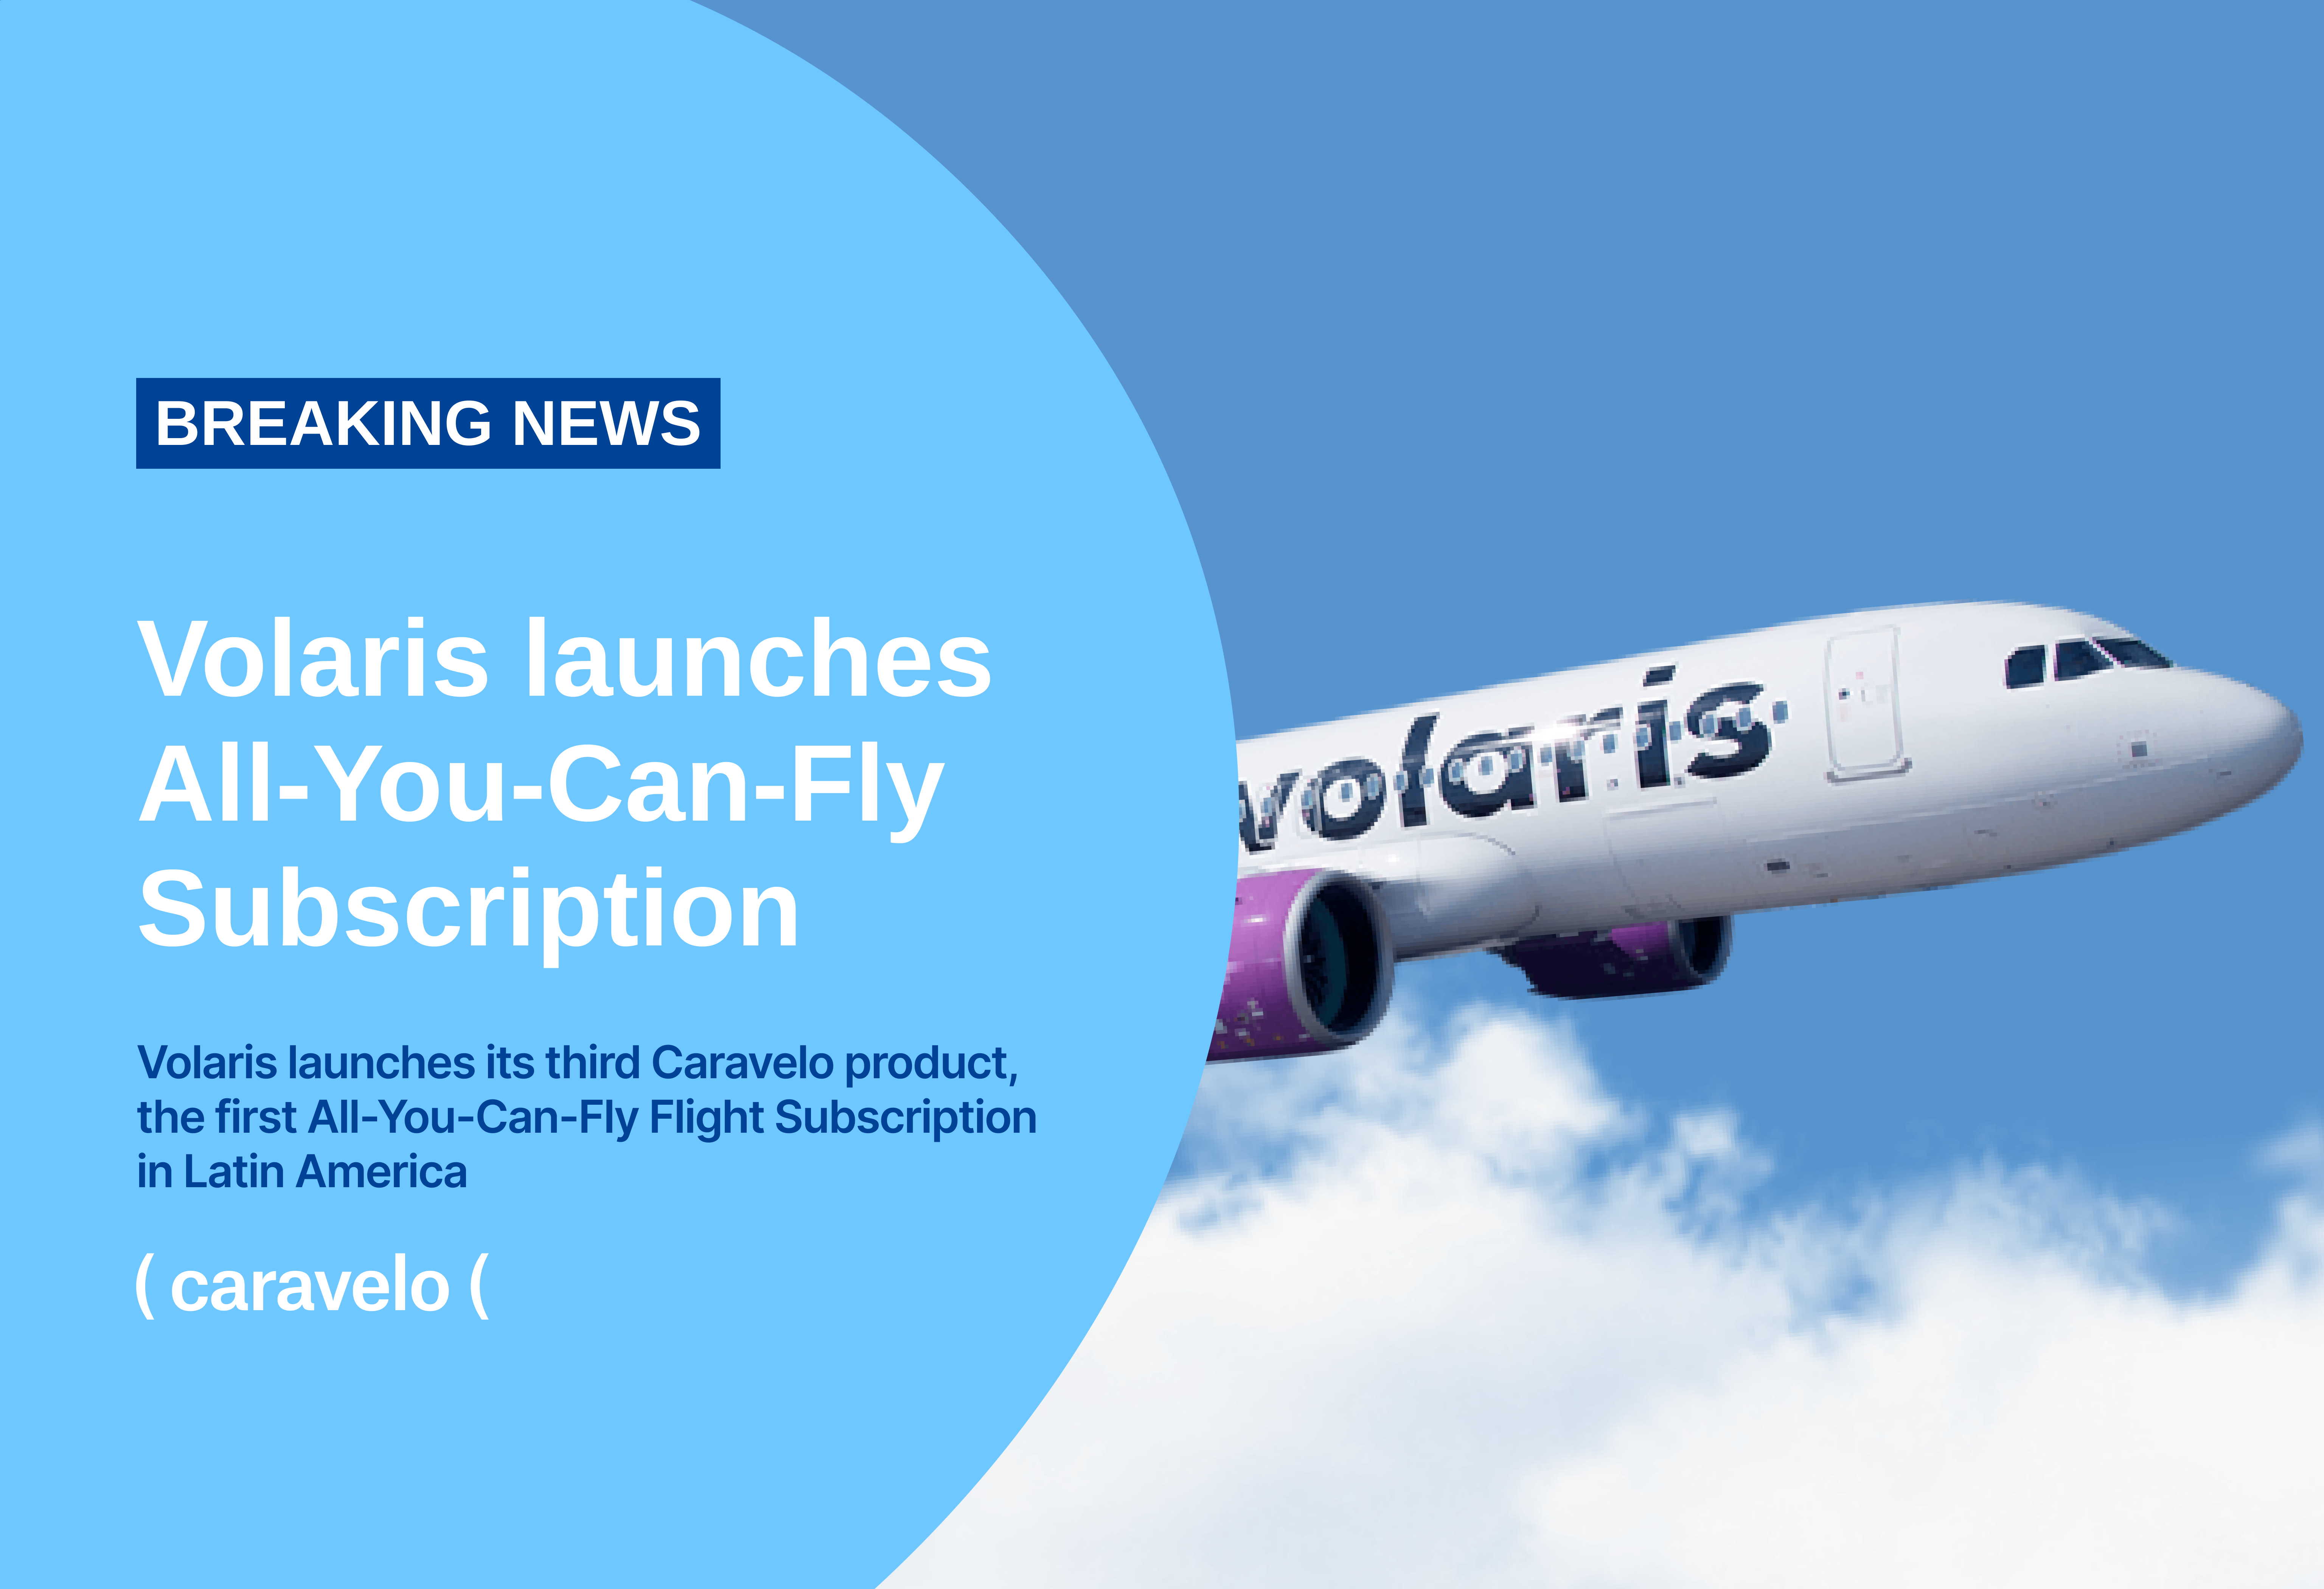 Volaris Partners With Caravelo to Launch a New, All-You-Can-Fly Subscription Called Pase Anual